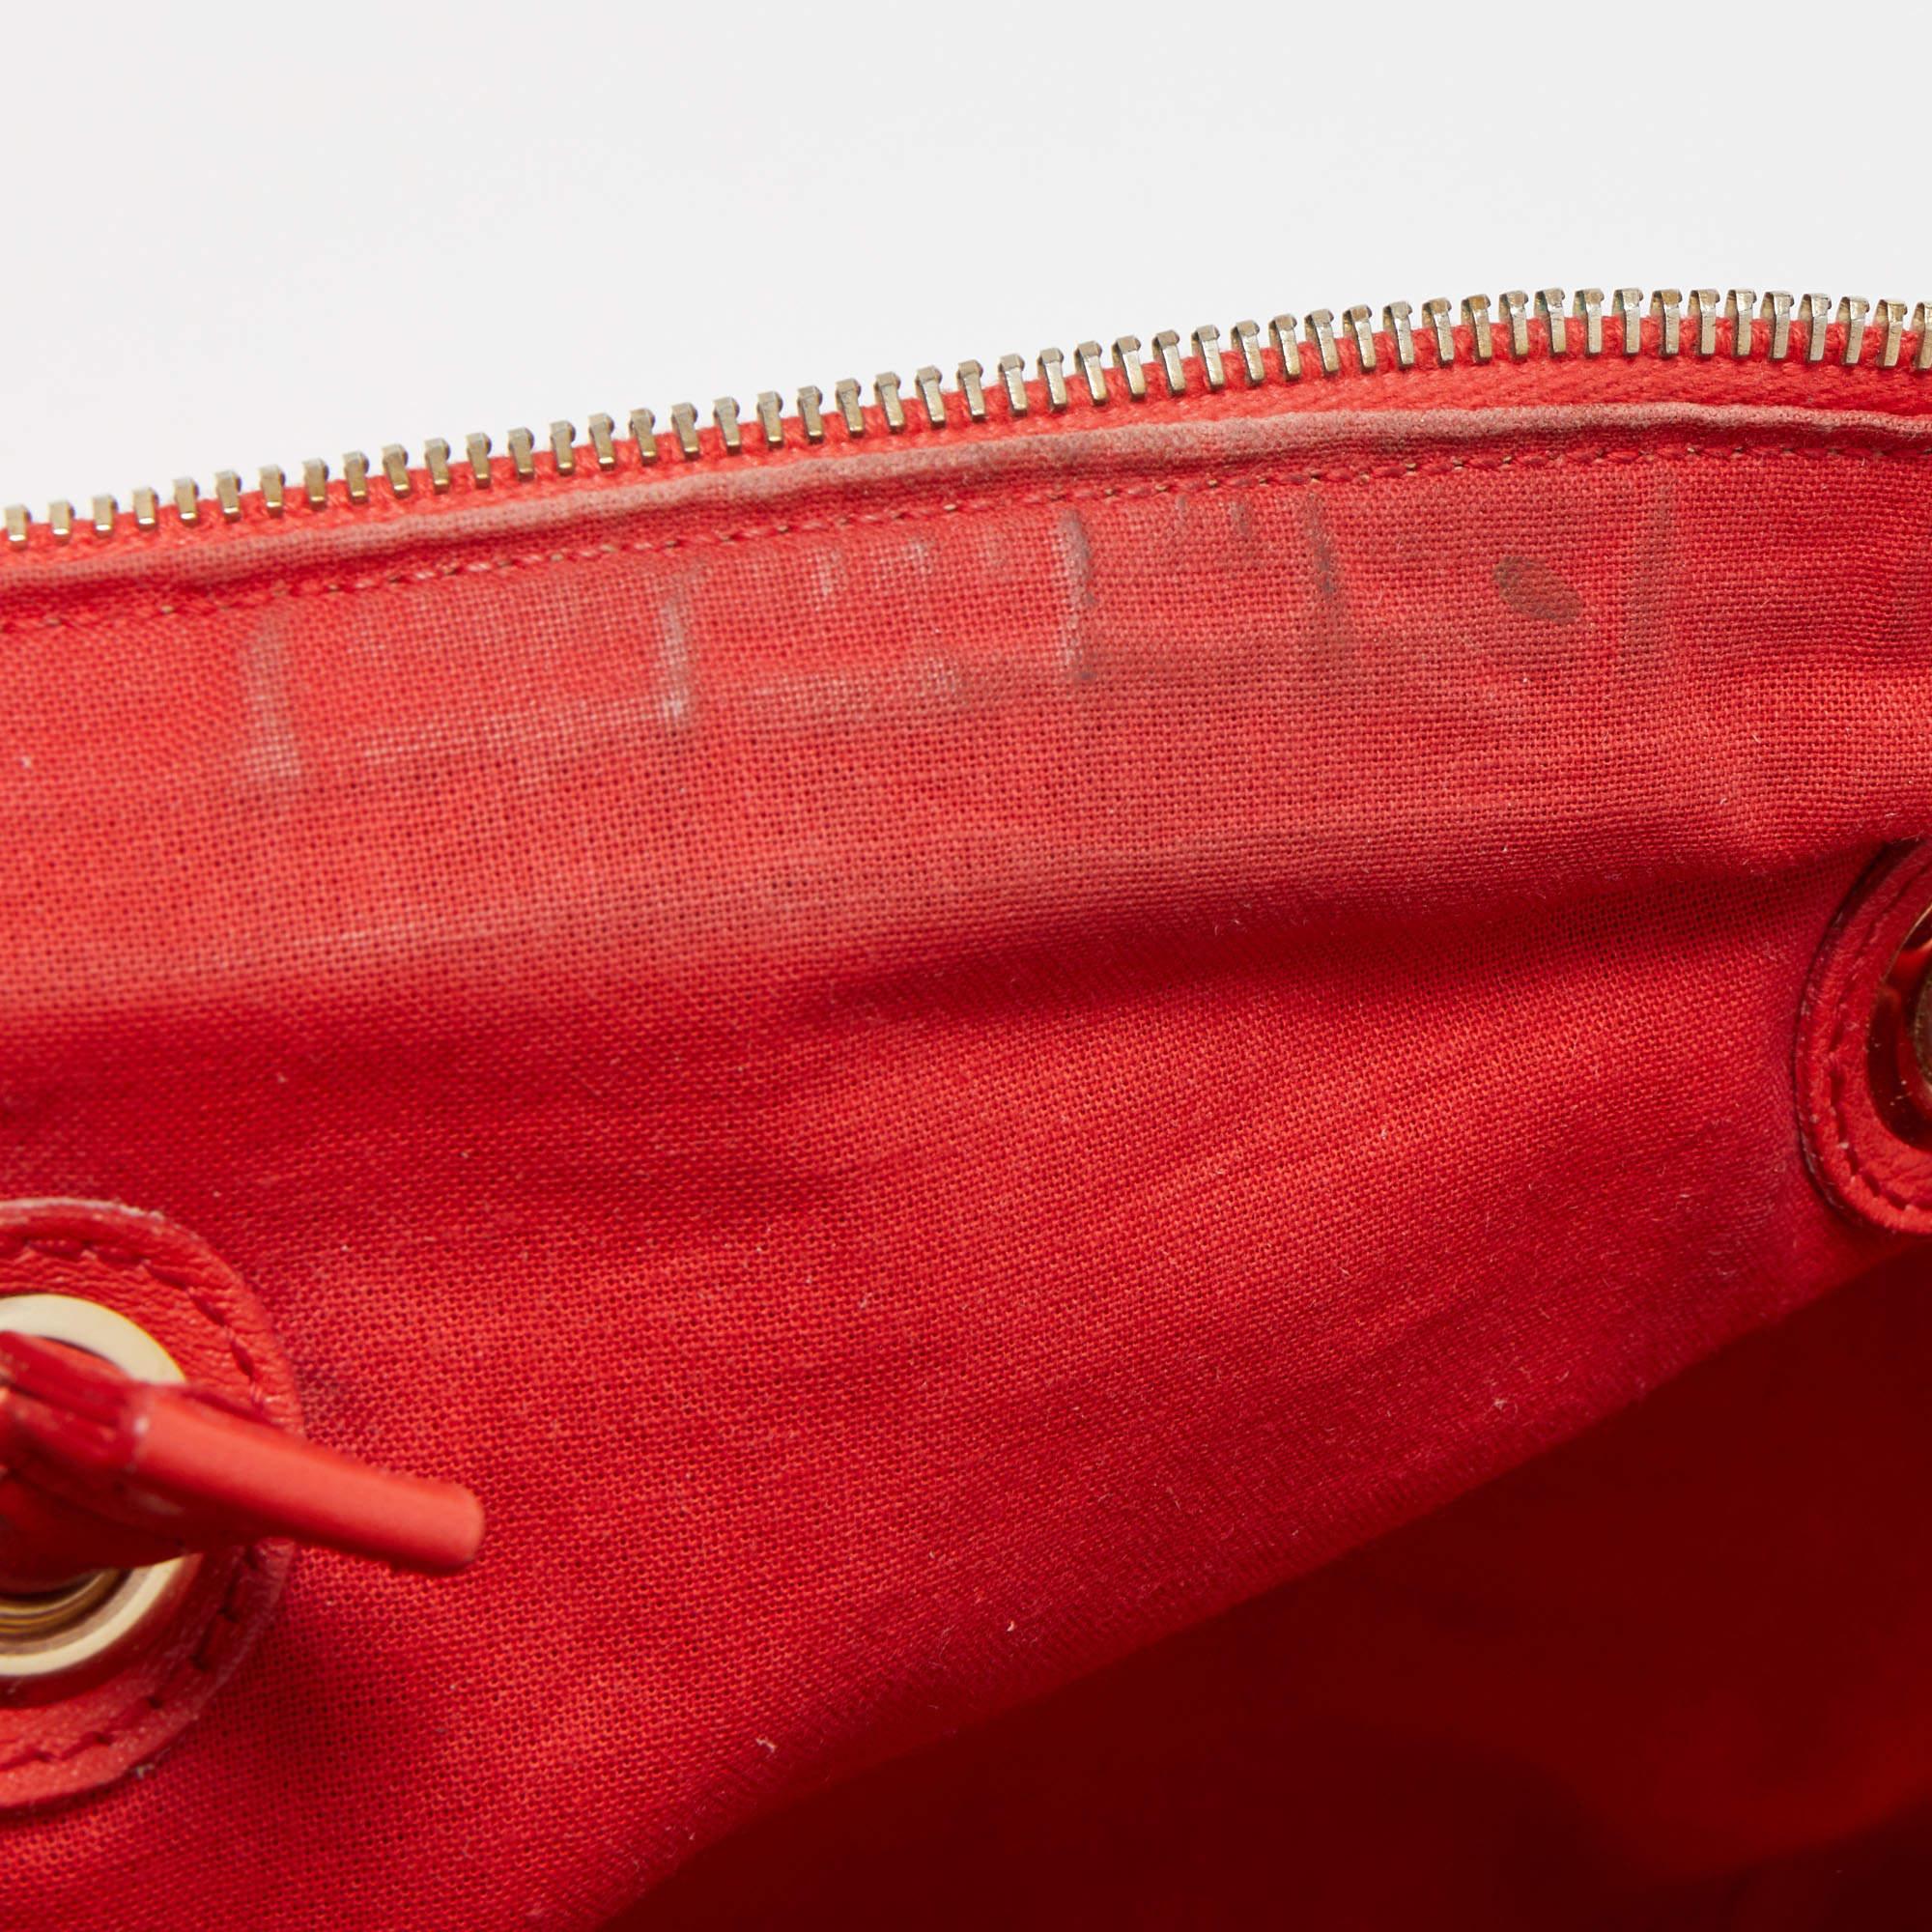 Yves Saint Laurent Red/Beige Leather Lucky Chyc Bowler Bag 12